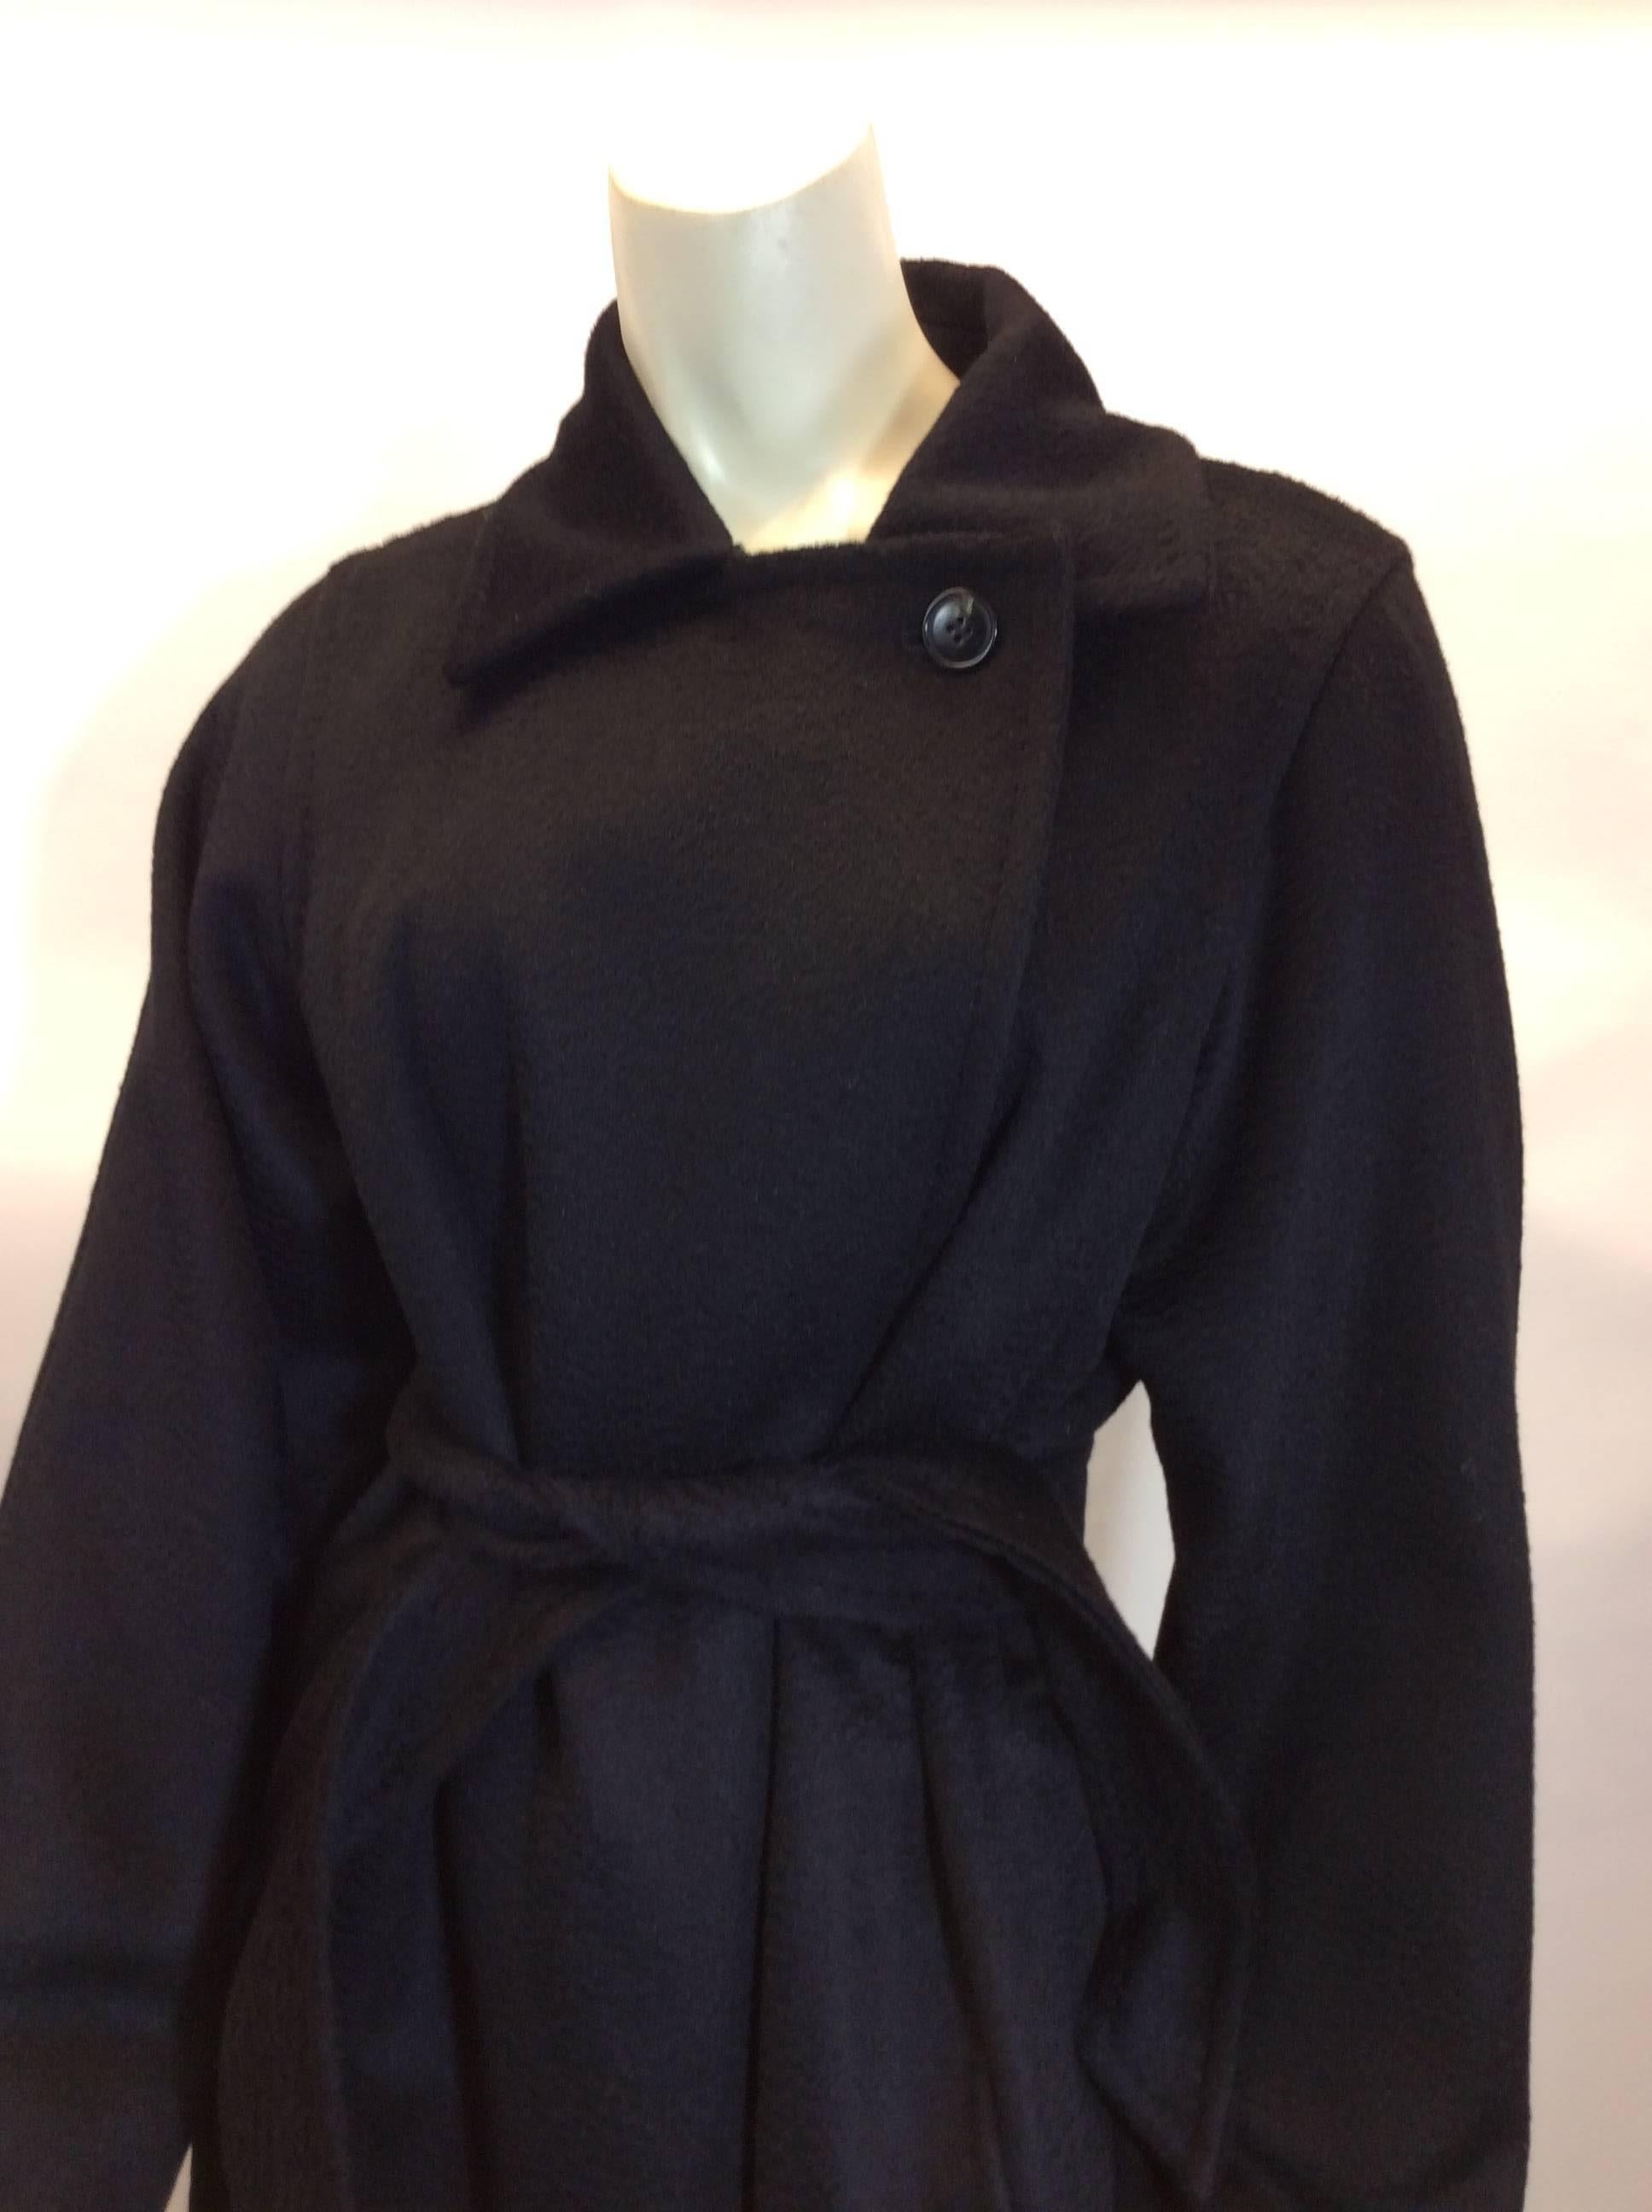 Maxmara Cashmere Black Wrap Belted Coat
$699
100% camel hair
Made in Italy
Top button closure
Two front pockets 
